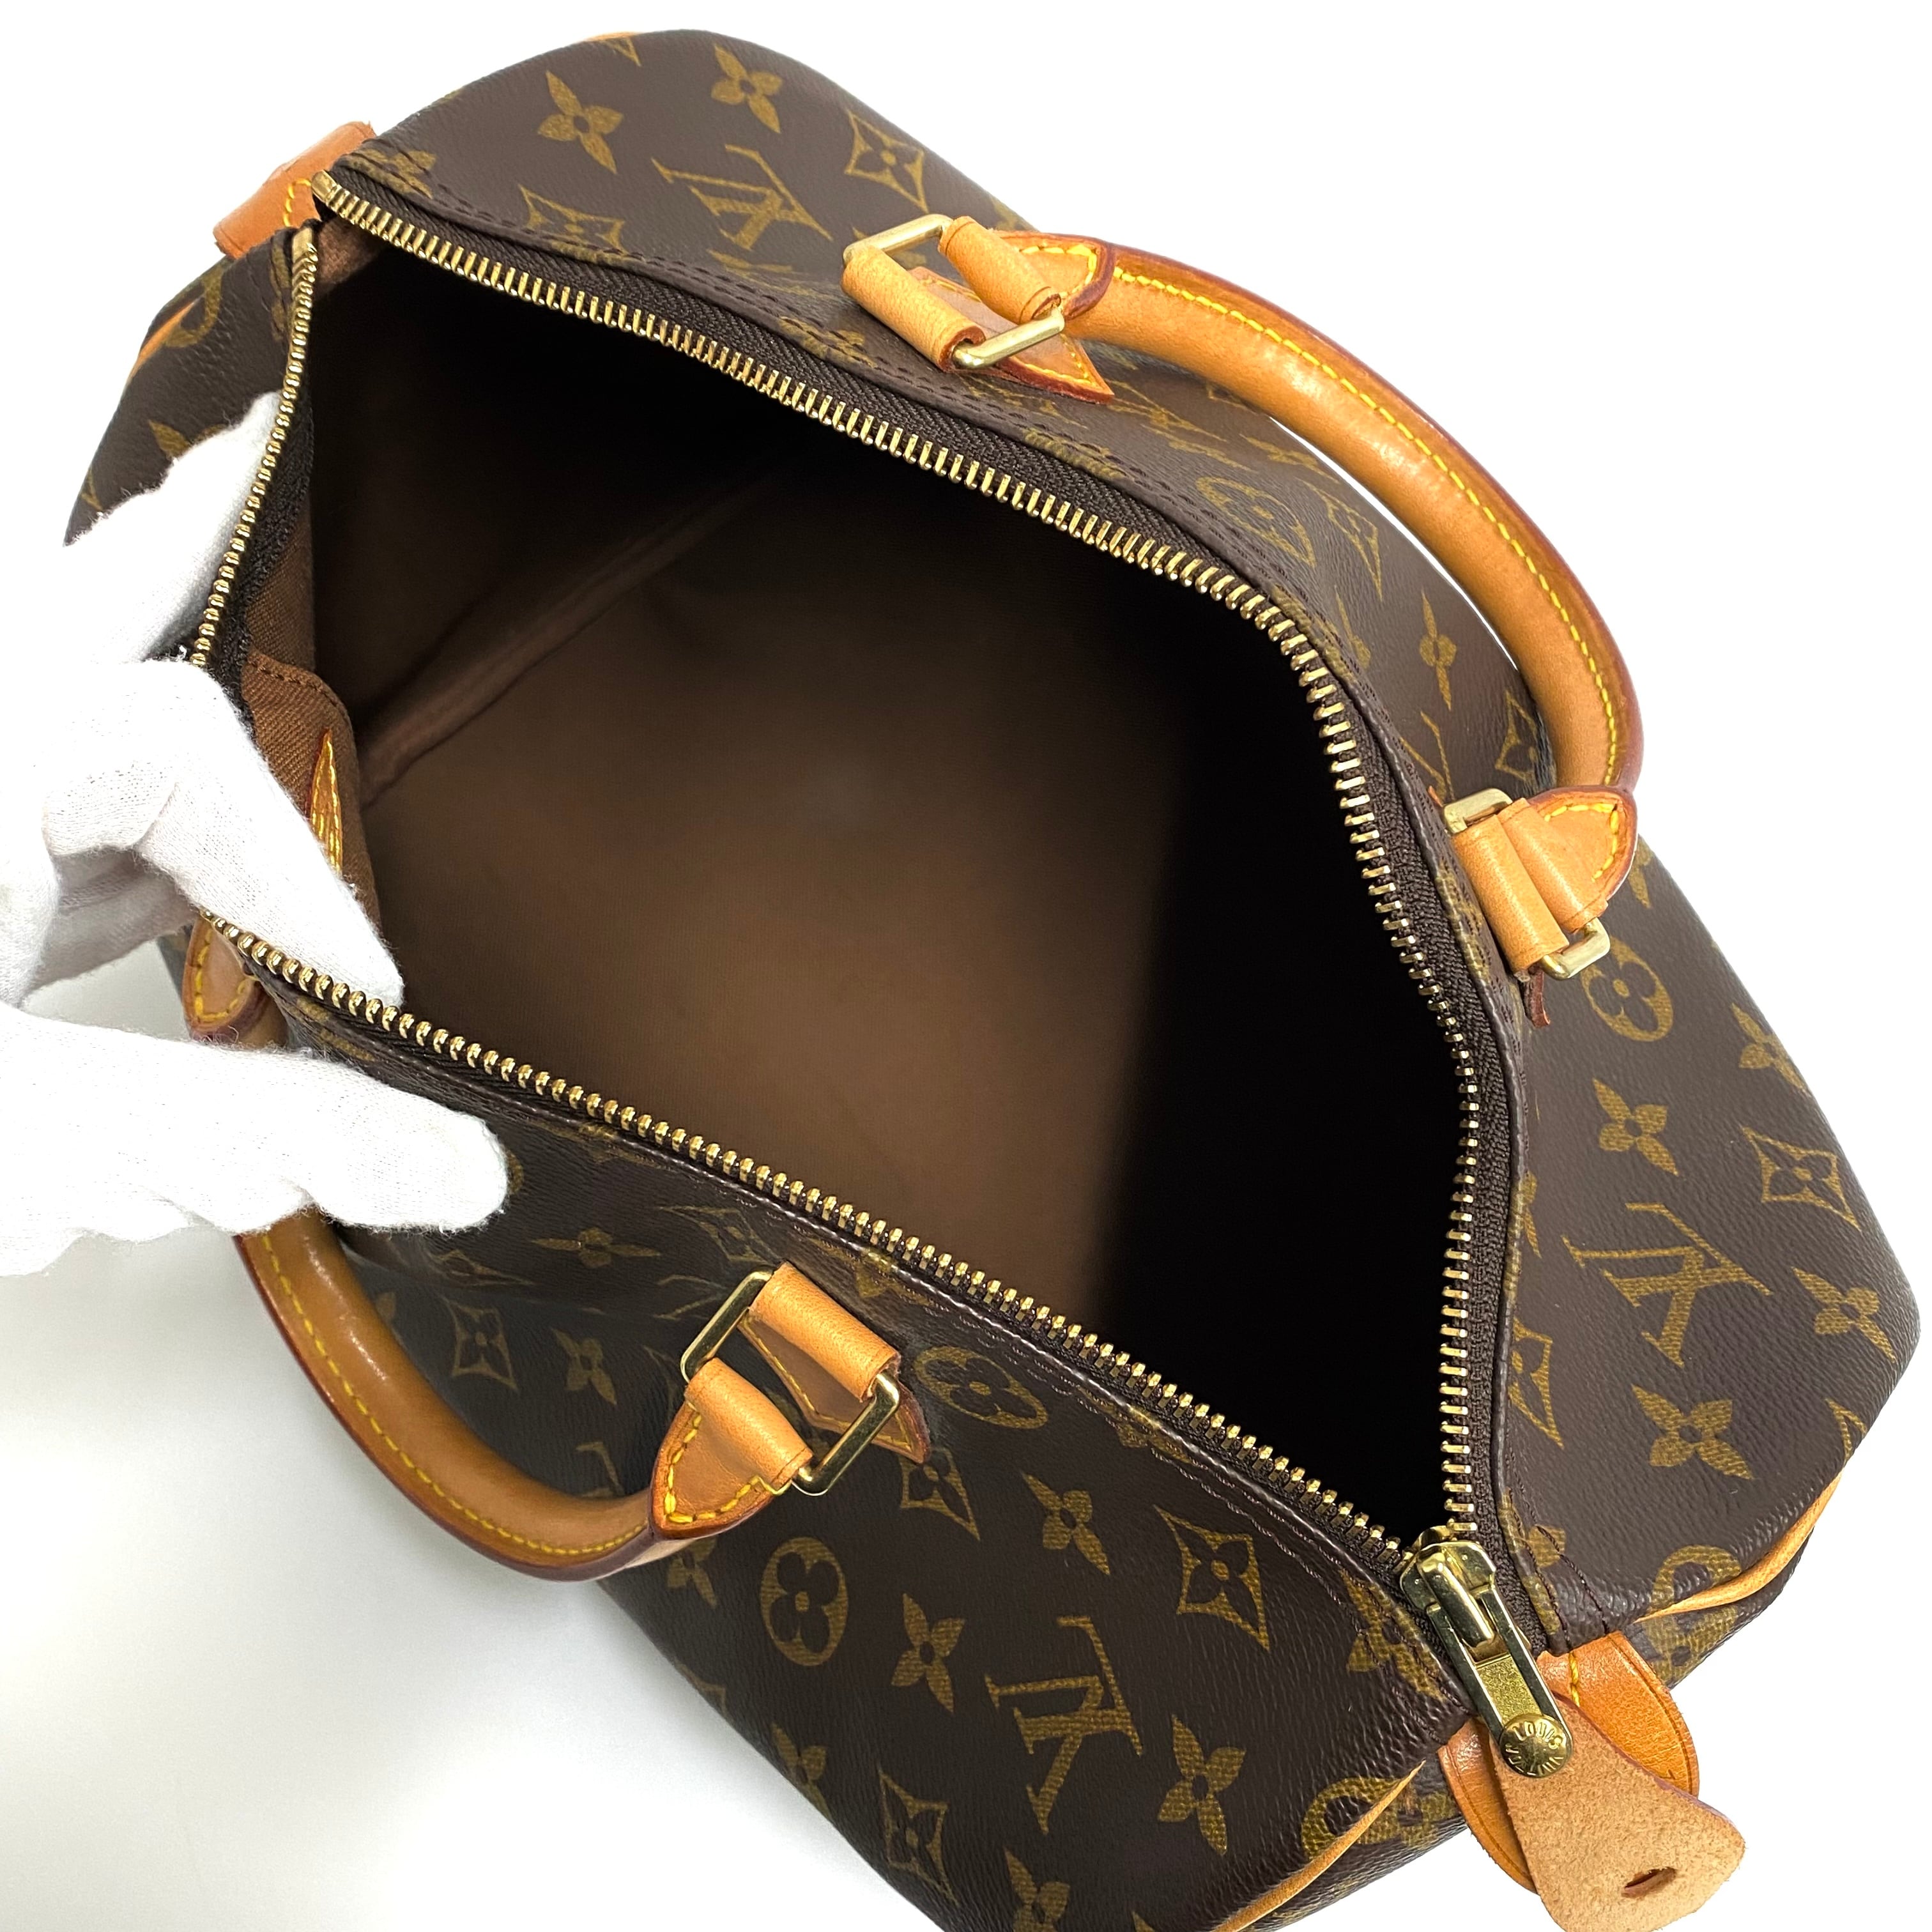 Reserved items※ LOUIS VUITTON ルイ・ヴィトン モノグラム スピーディ 